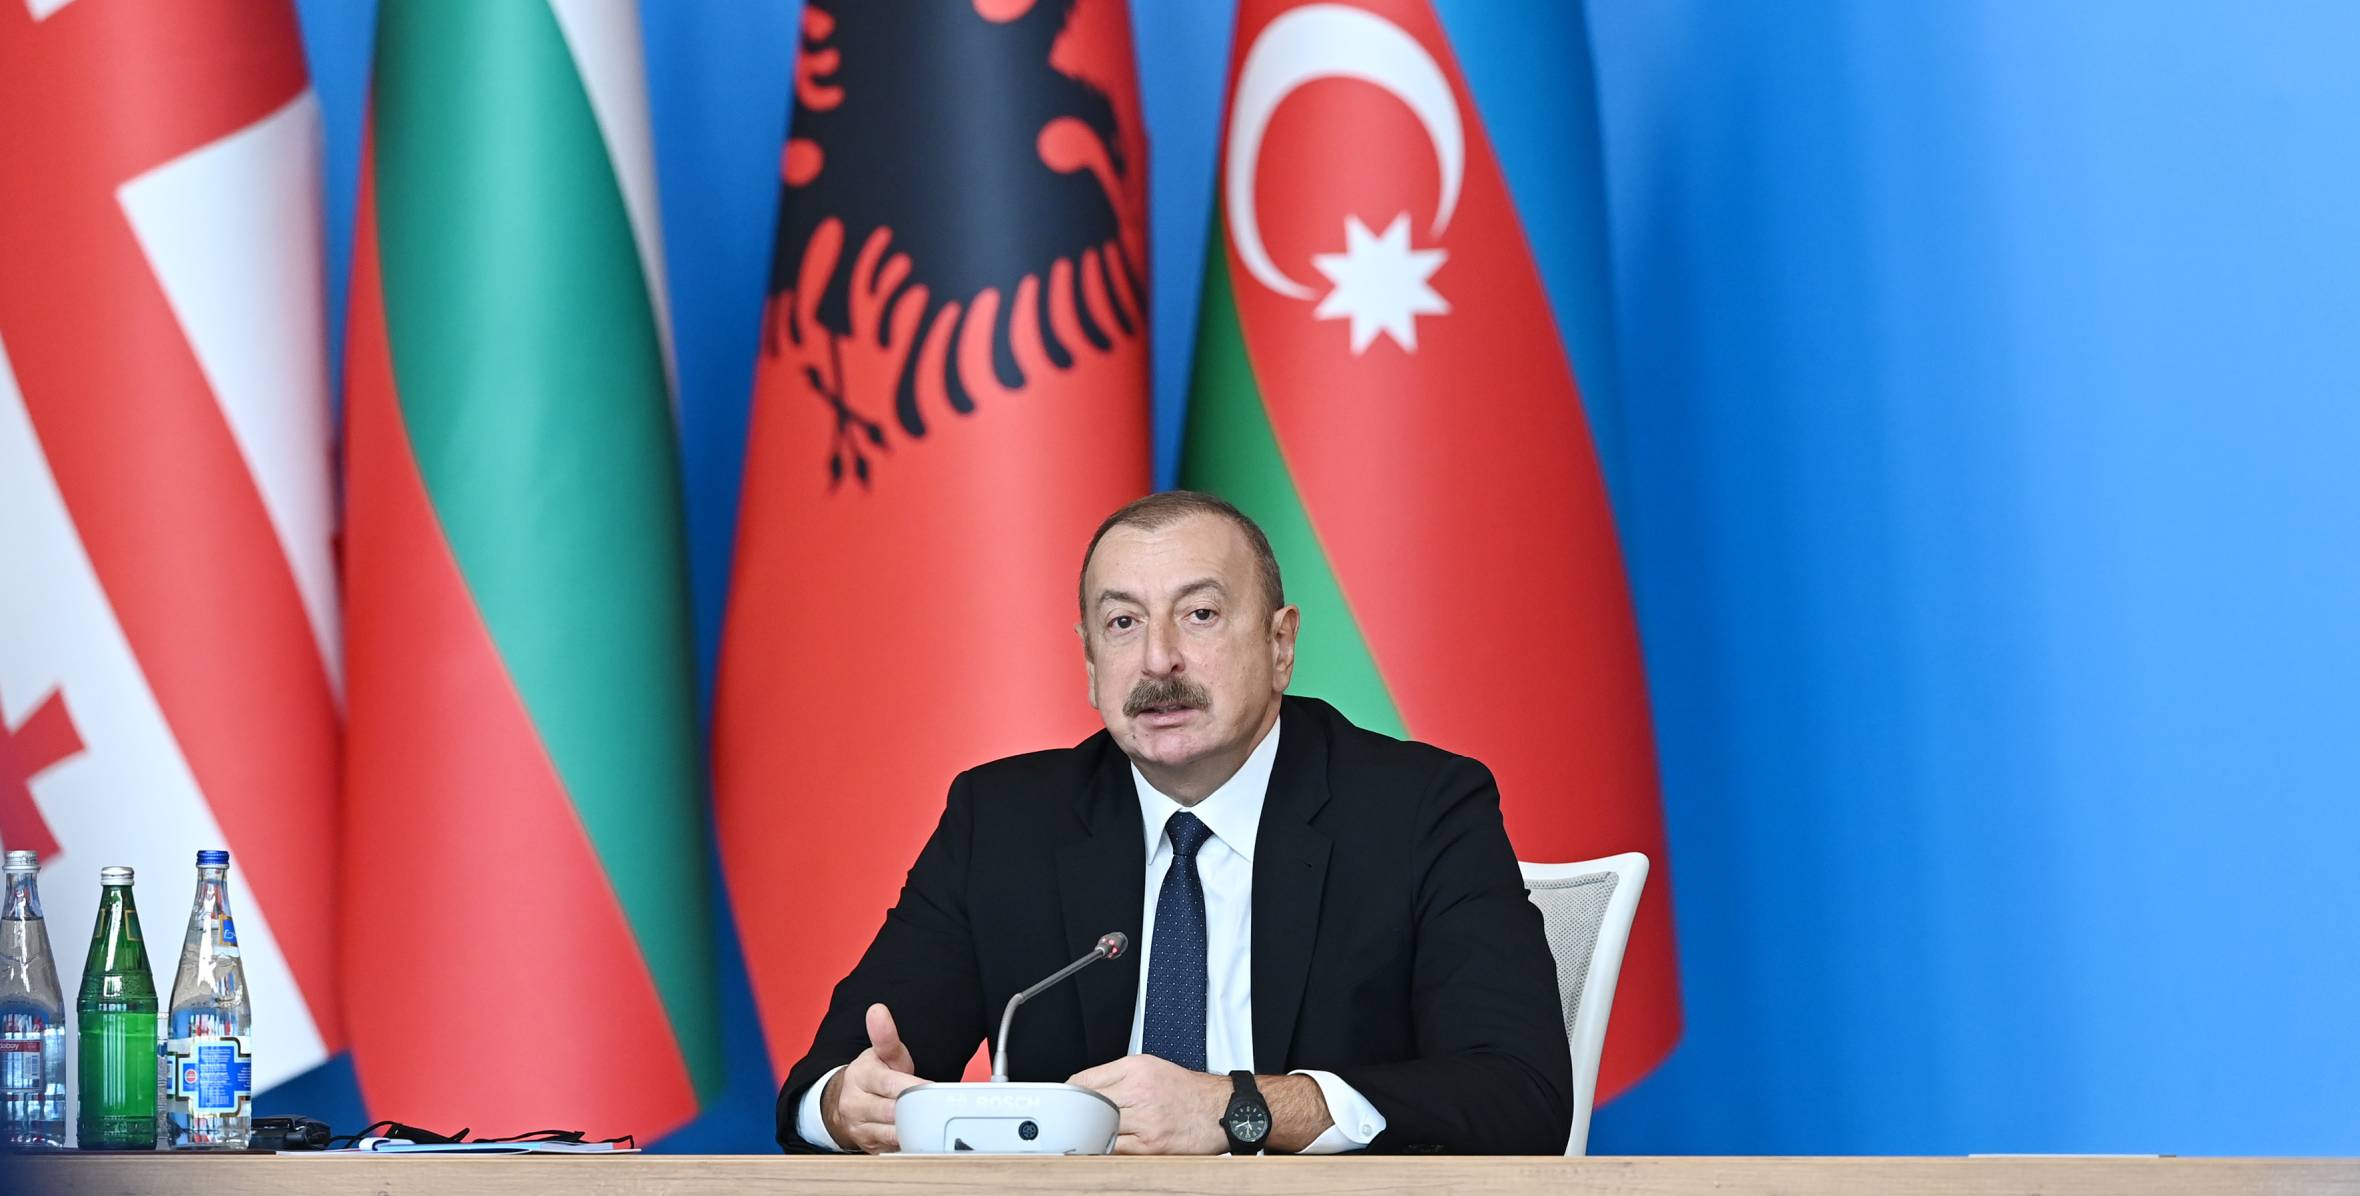 Ilham Aliyev attended the  8th Ministerial Meeting of SGC Advisory Council in Baku